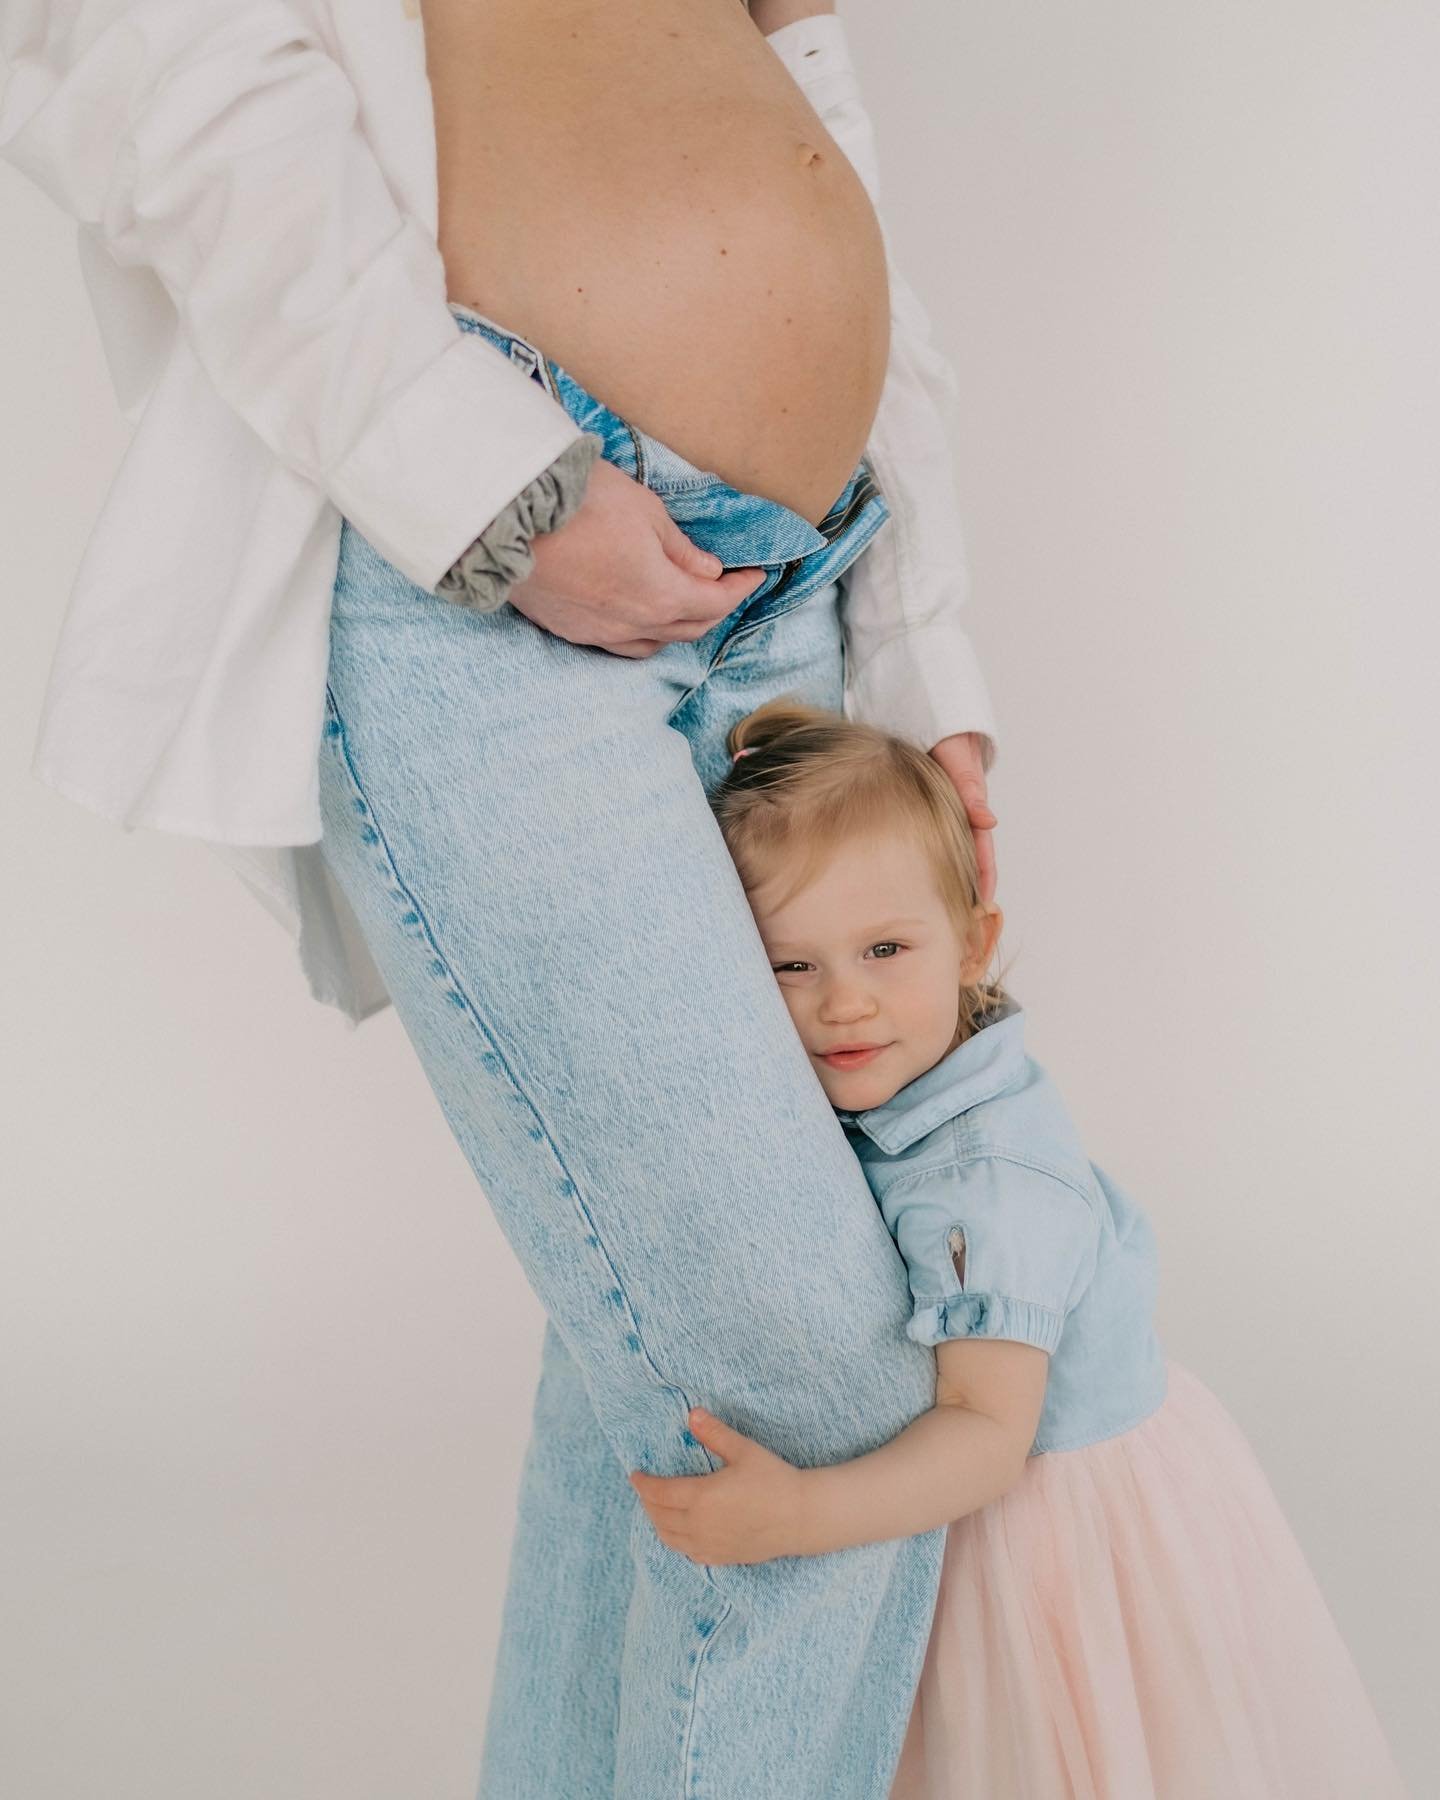 I know I say this a lot, but it&rsquo;s only because I have met some amazing humans through my job. @kristenleannxo and her family are always SUCH A JOY to spend time with. We met during her maternity session for little Miss Hayden and they&rsquo;re 